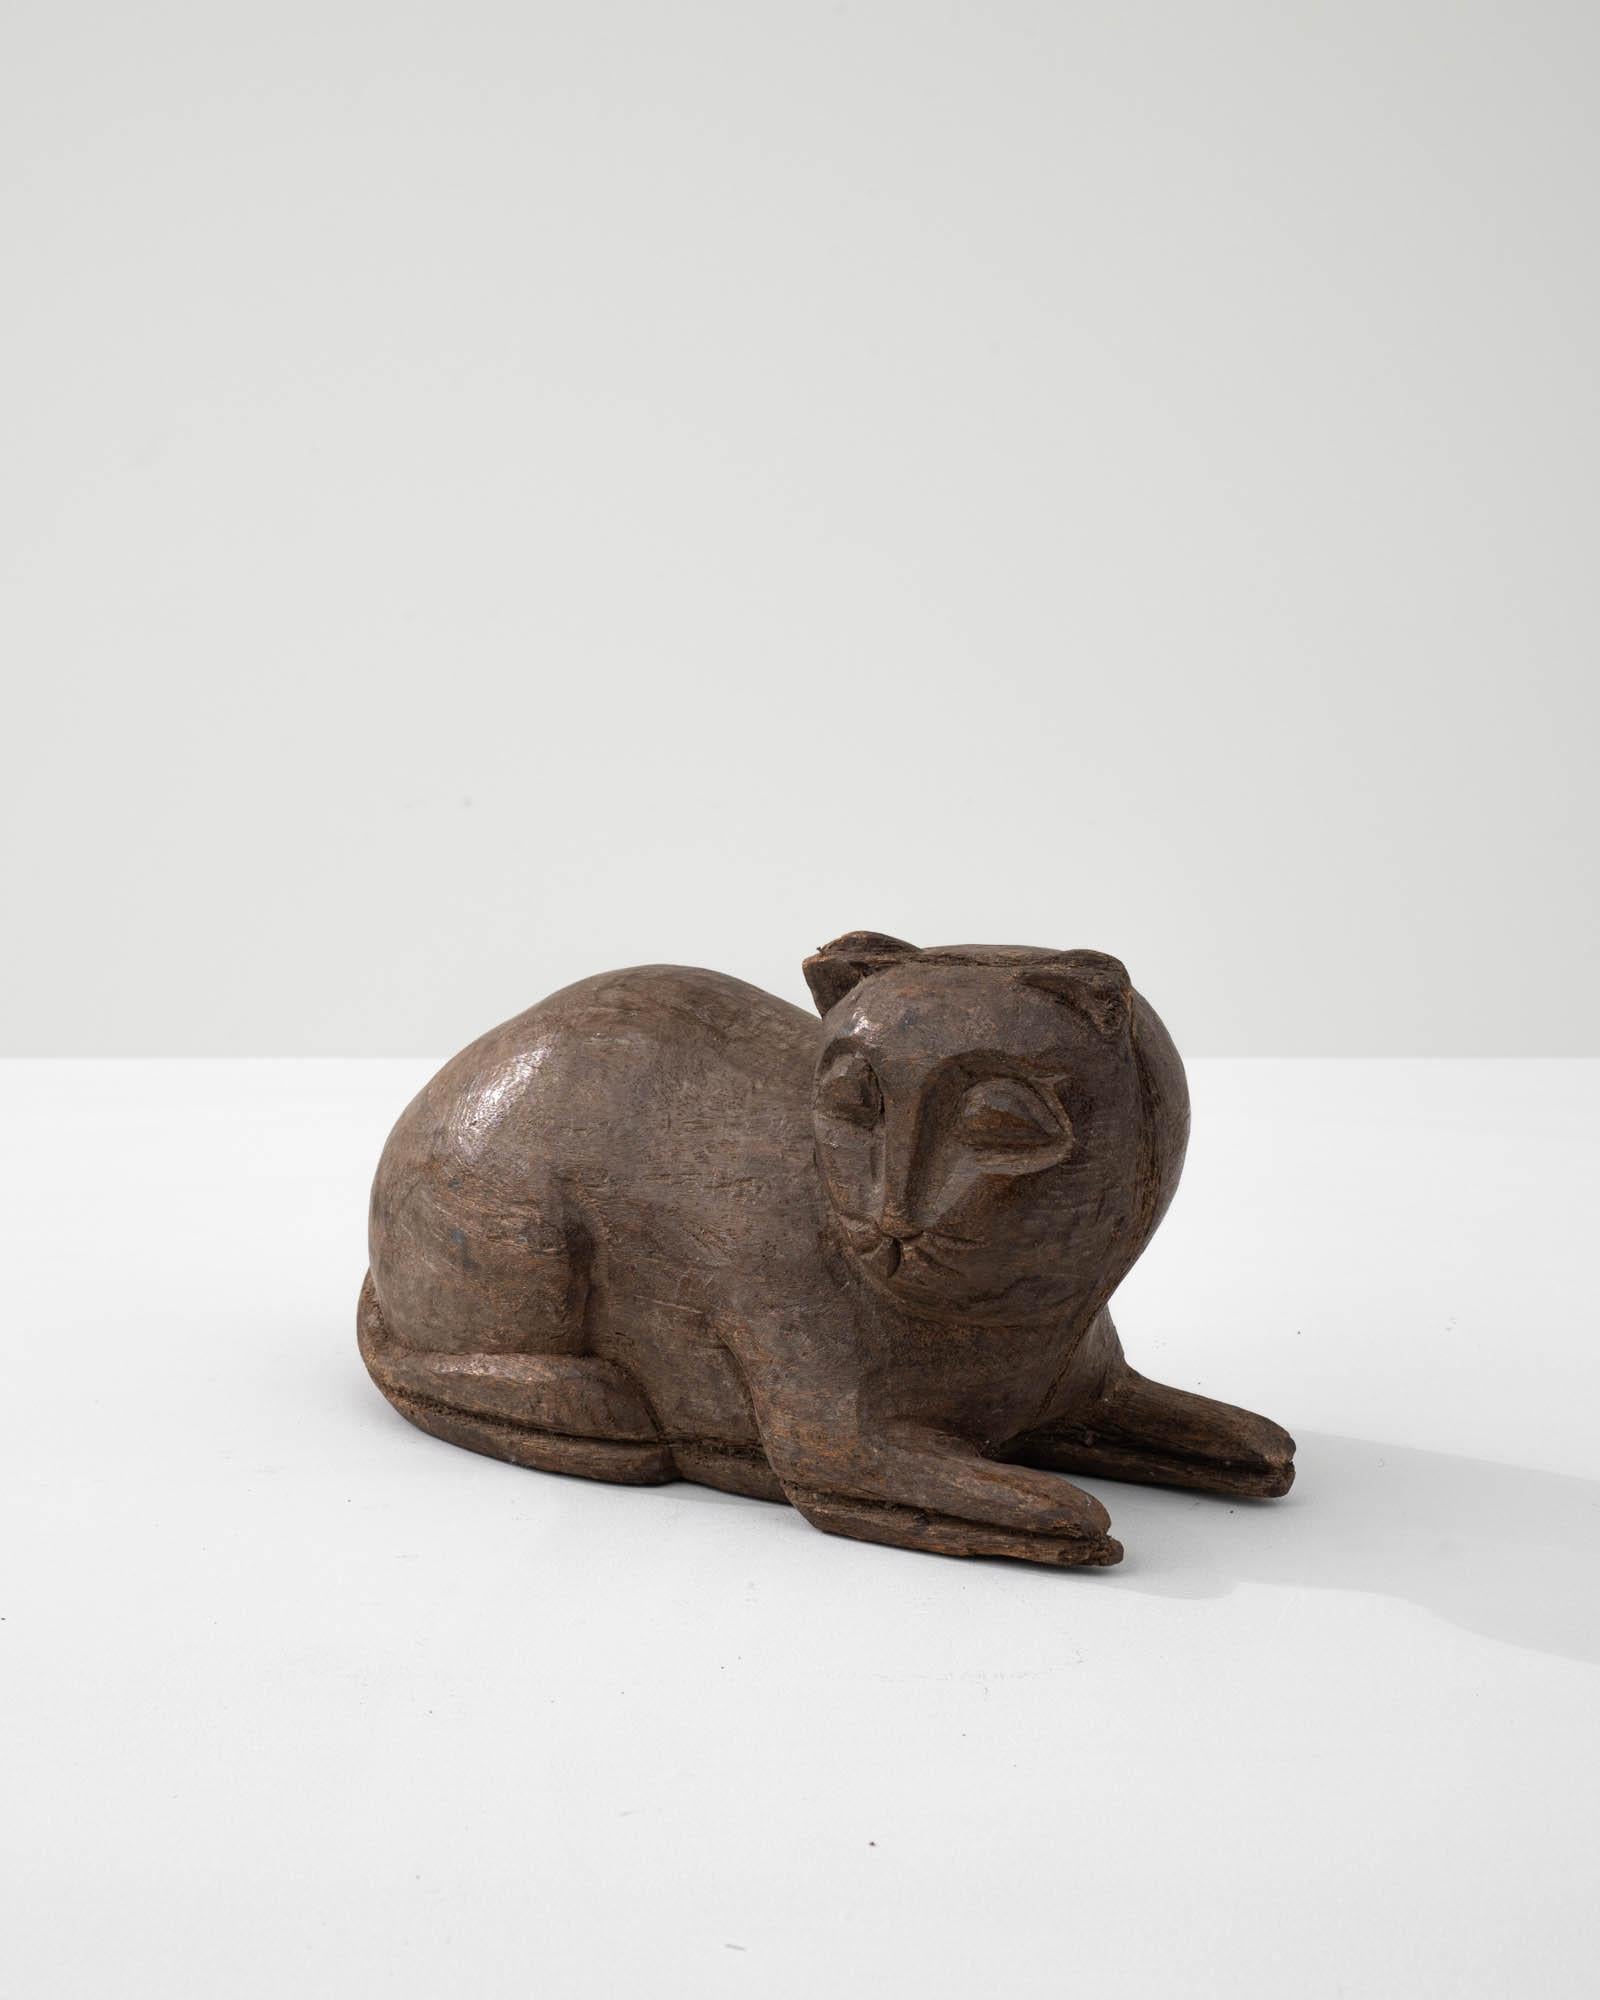 Radiating an aura of feline charm and innocence, this 20th-century French Carved Wooden Cat Decoration captures the essence of a cat in a sphinx position. The smooth wooden surface showcases meticulous detailing, with the cat's eyes and ears